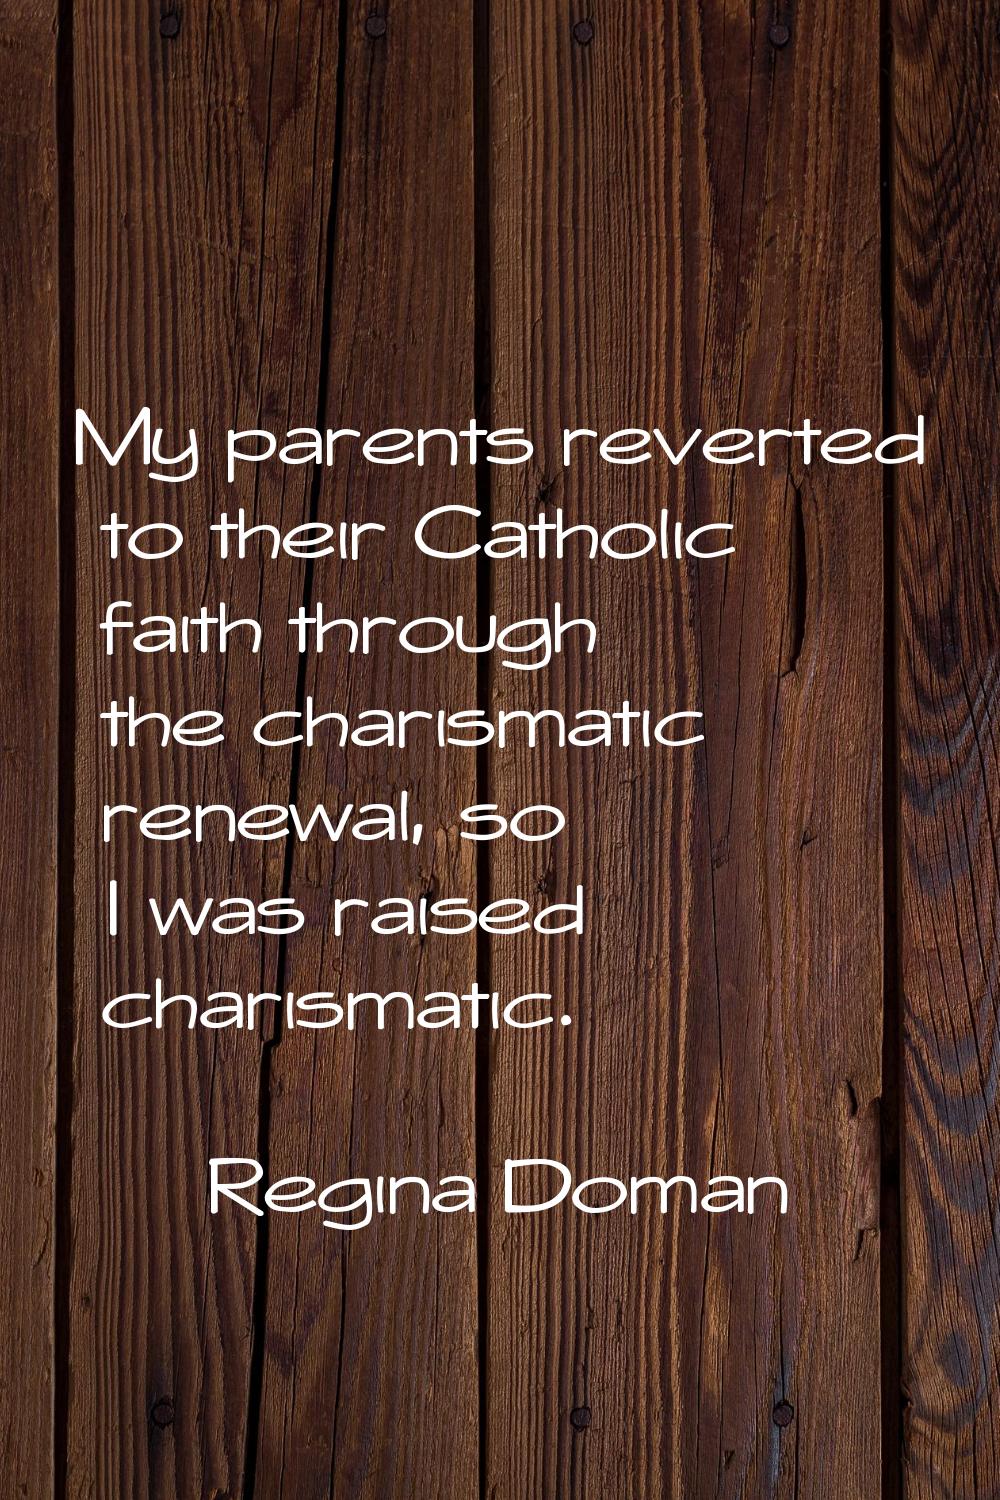 My parents reverted to their Catholic faith through the charismatic renewal, so I was raised charis